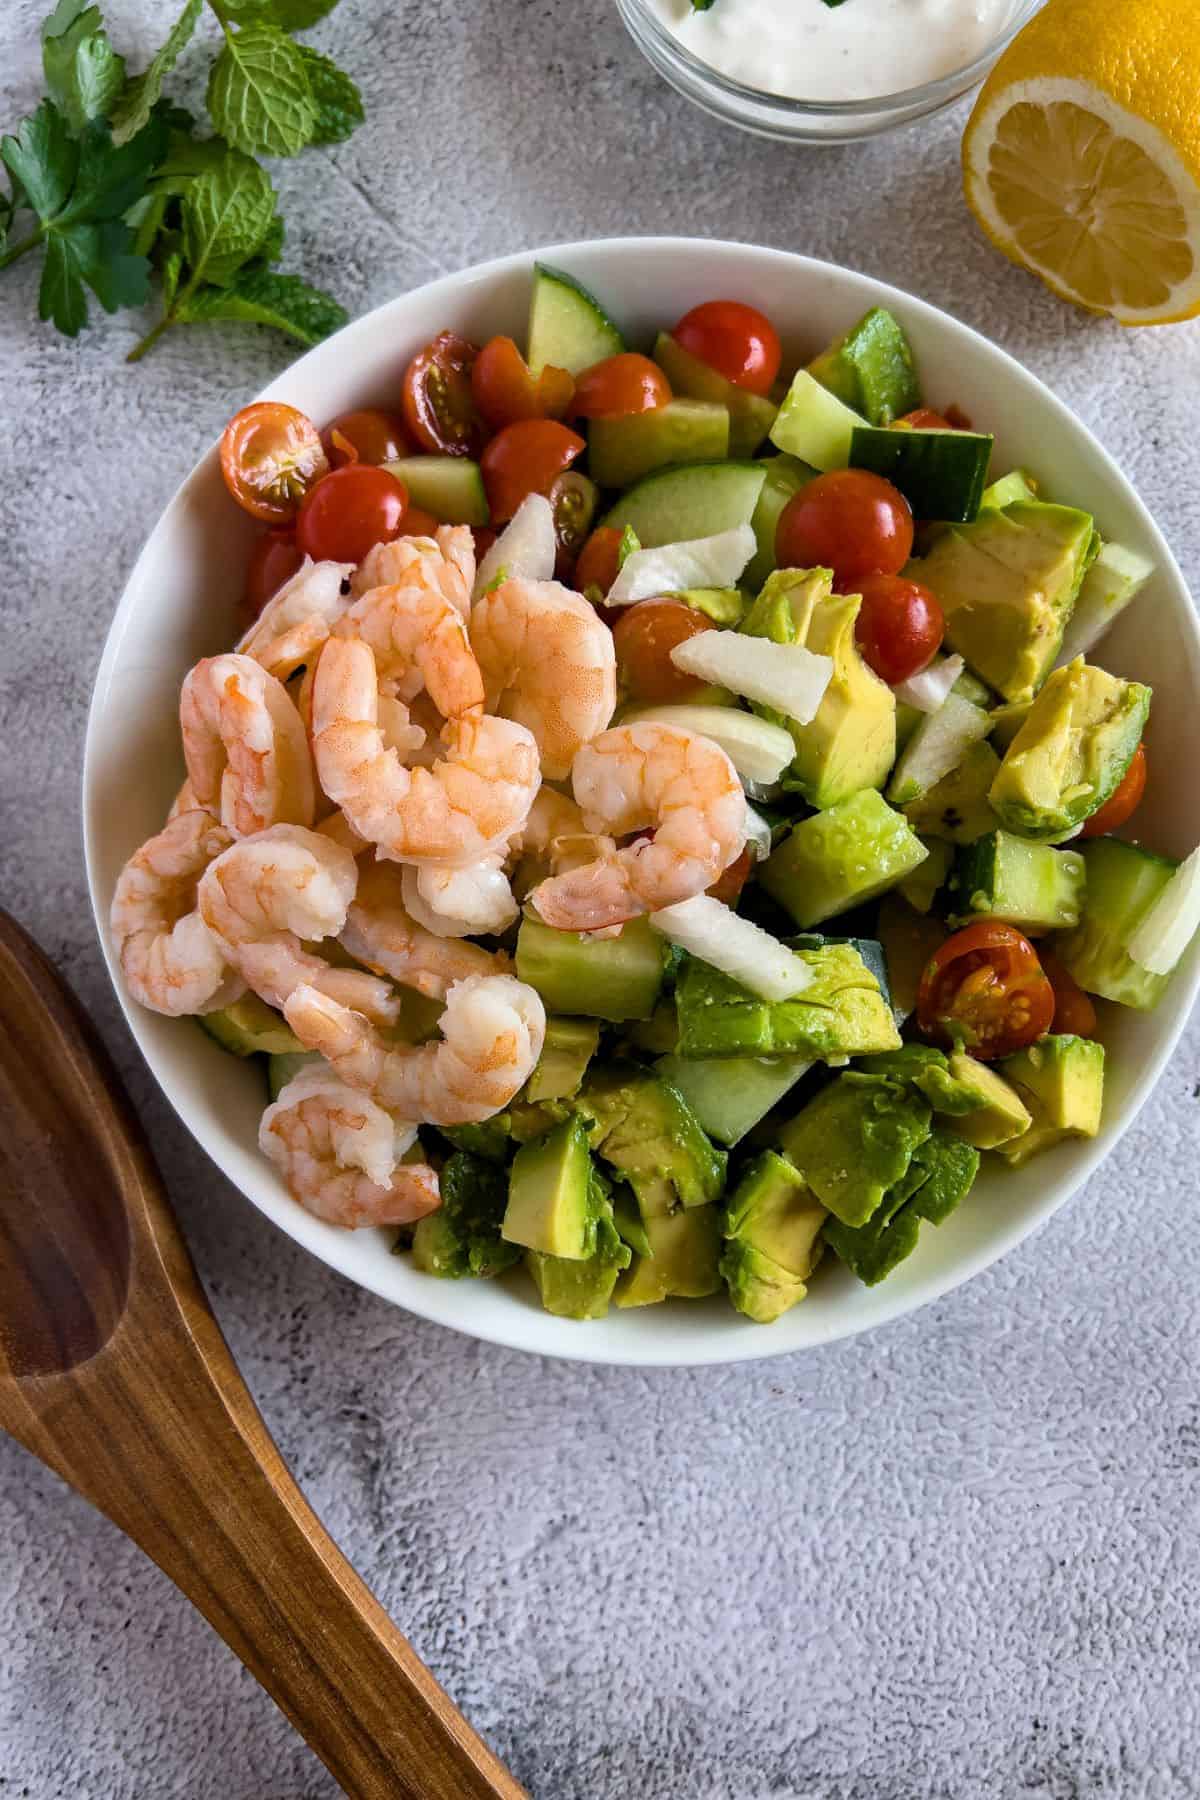 Combining all the ingredients for the shrimp avocado summer salad.